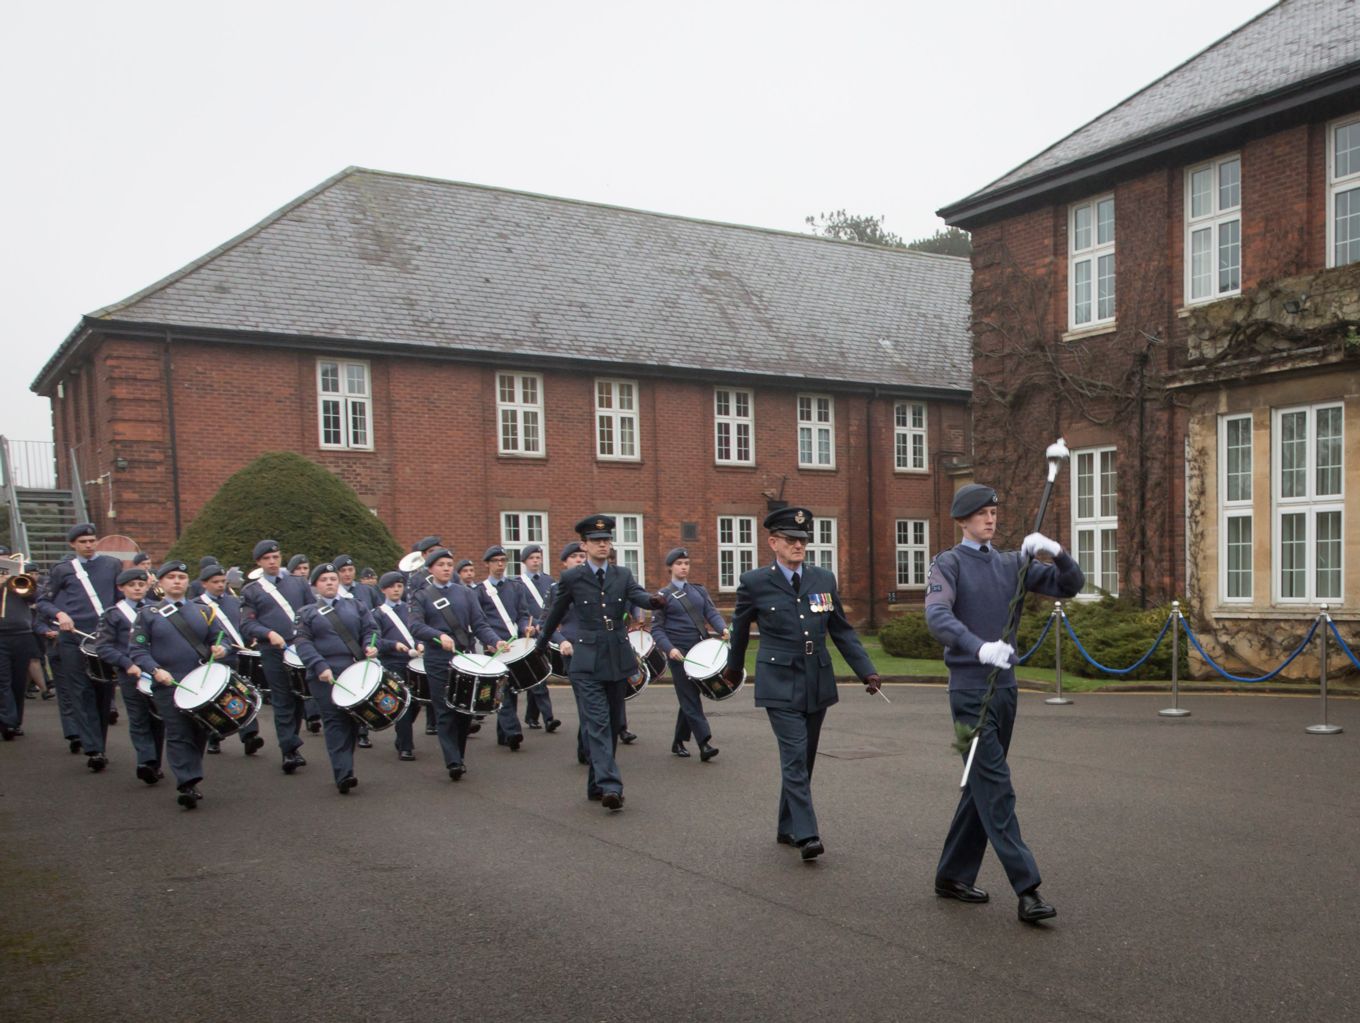 Display of marching and music from the Air Cadets